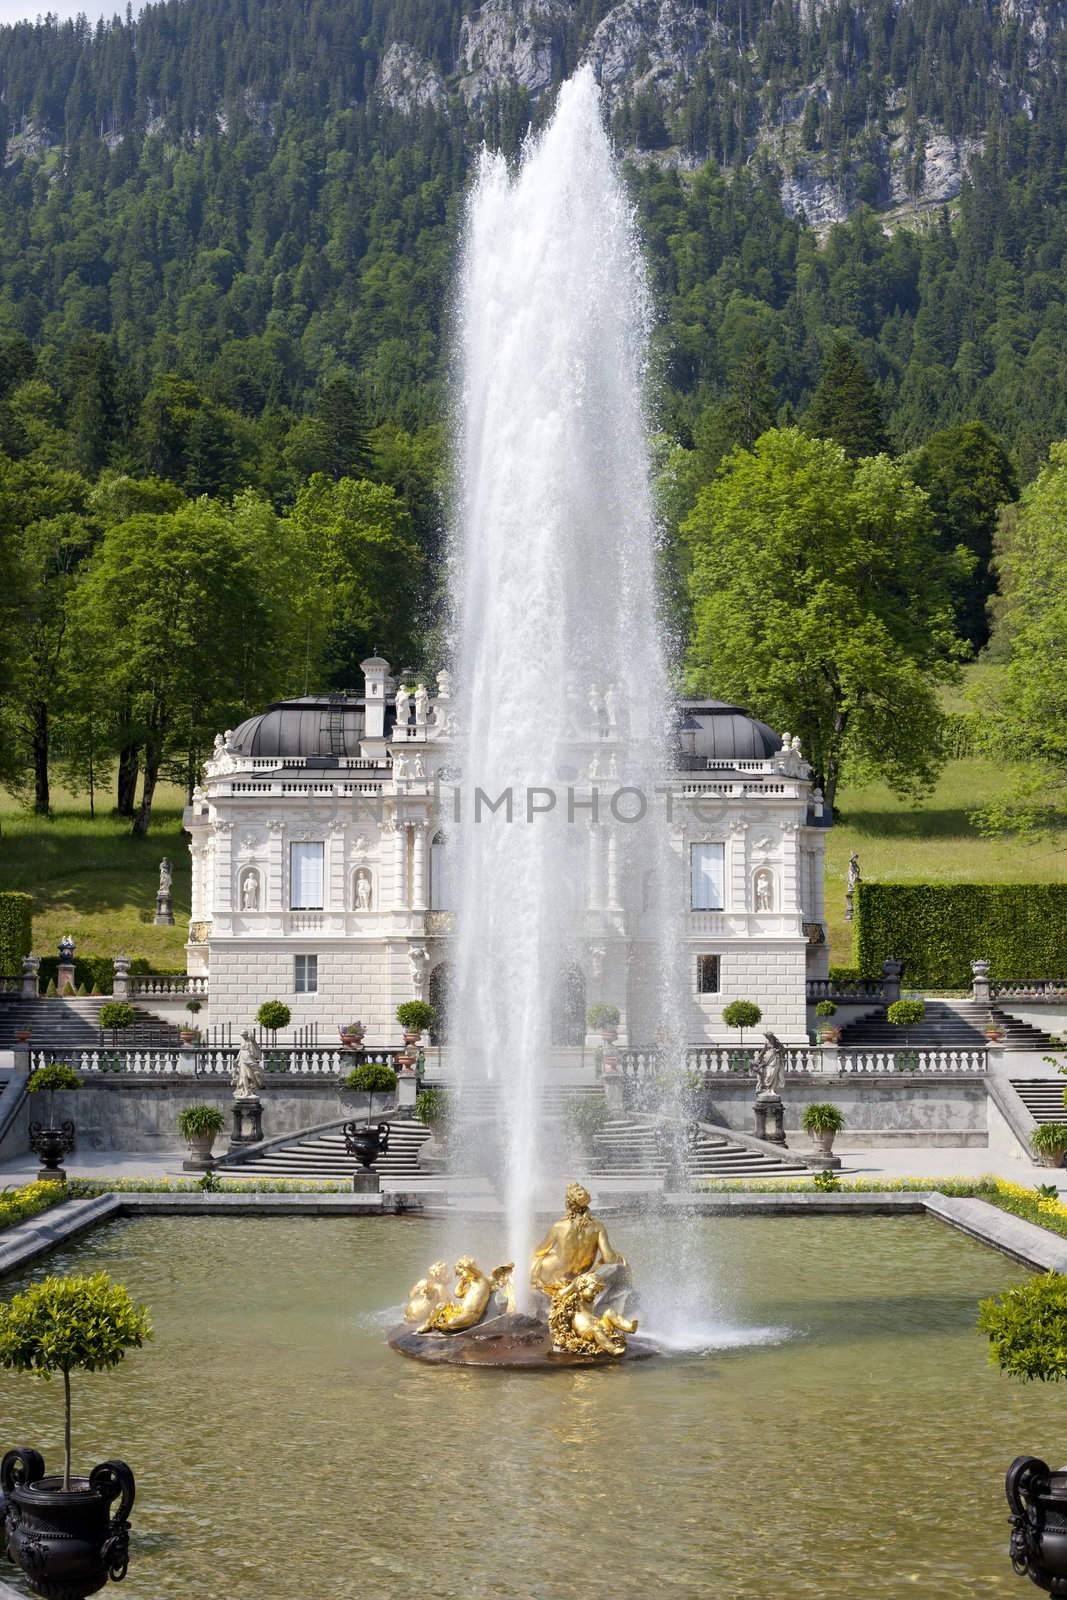 An image of the beautiful Castle Linderhof